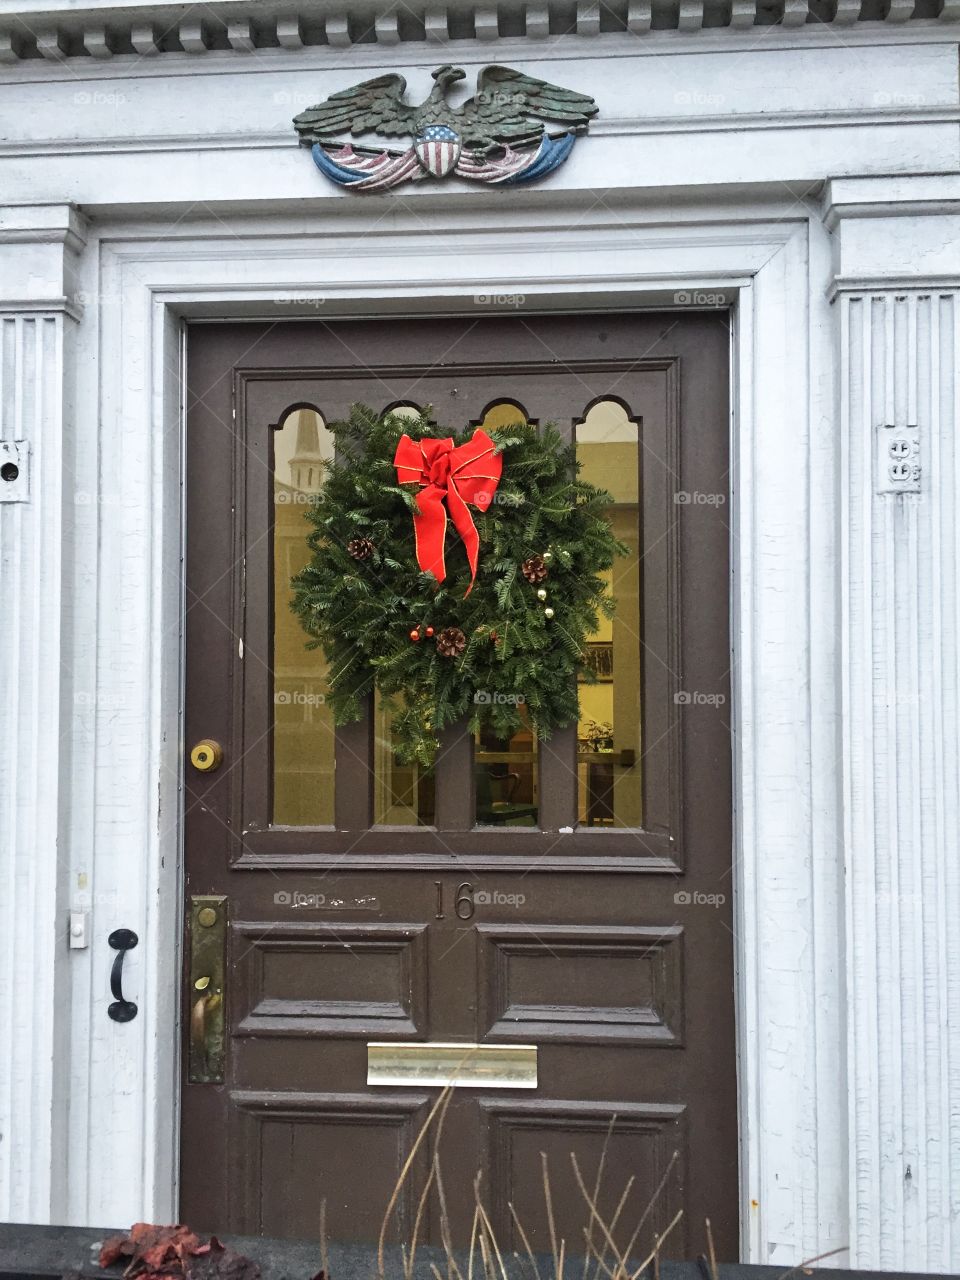 This is a festive door decorated with a Christmas wreath. The door is brown and the wreath is green with red accents.